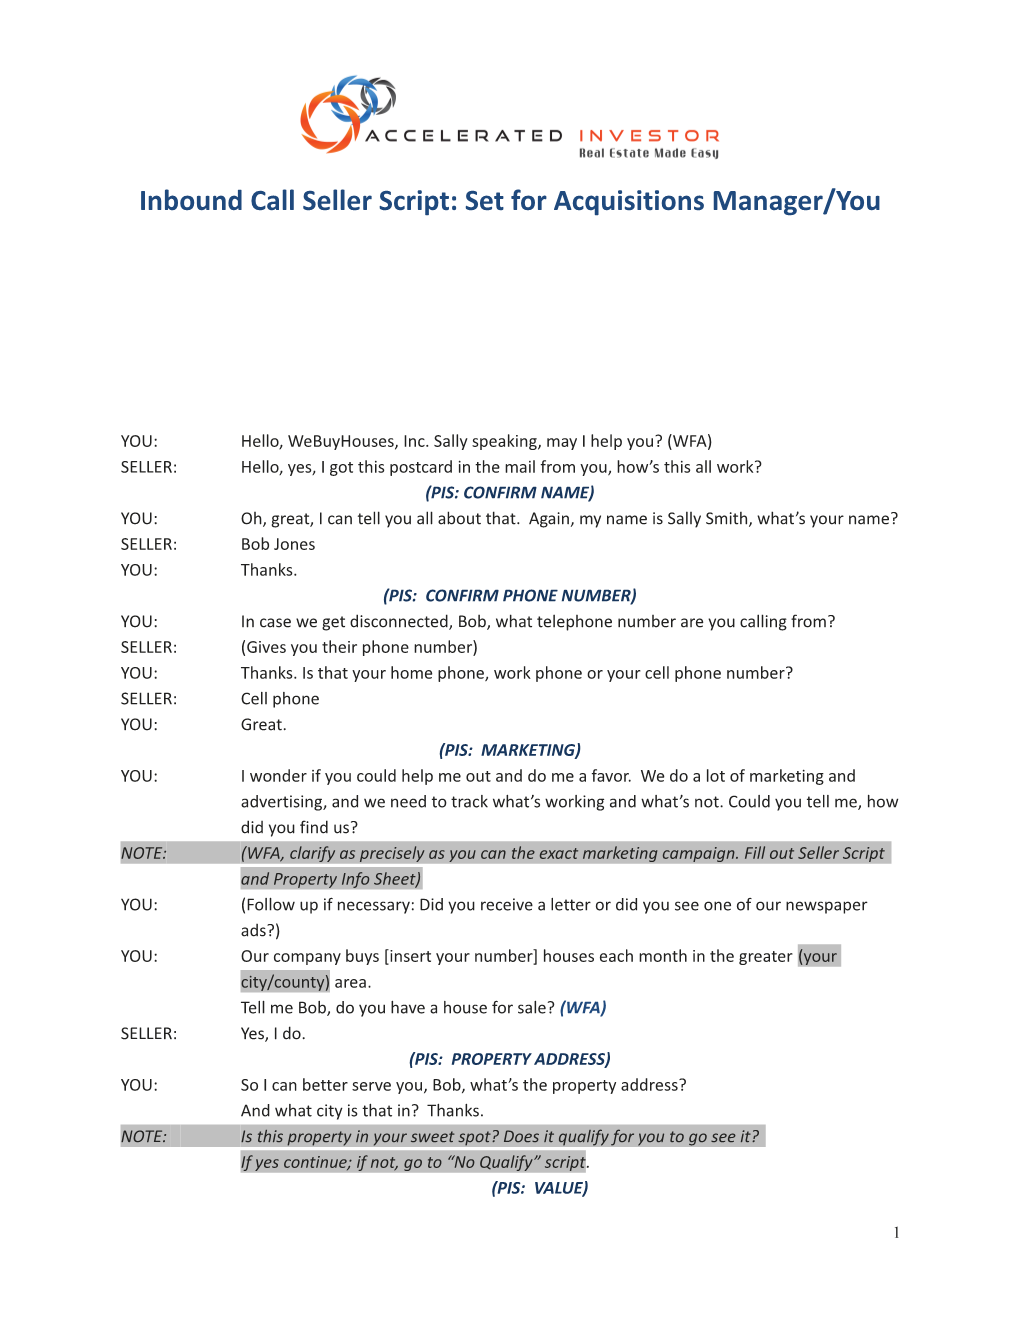 Inbound Call Seller Script: Set for Acquisitions Manager/You